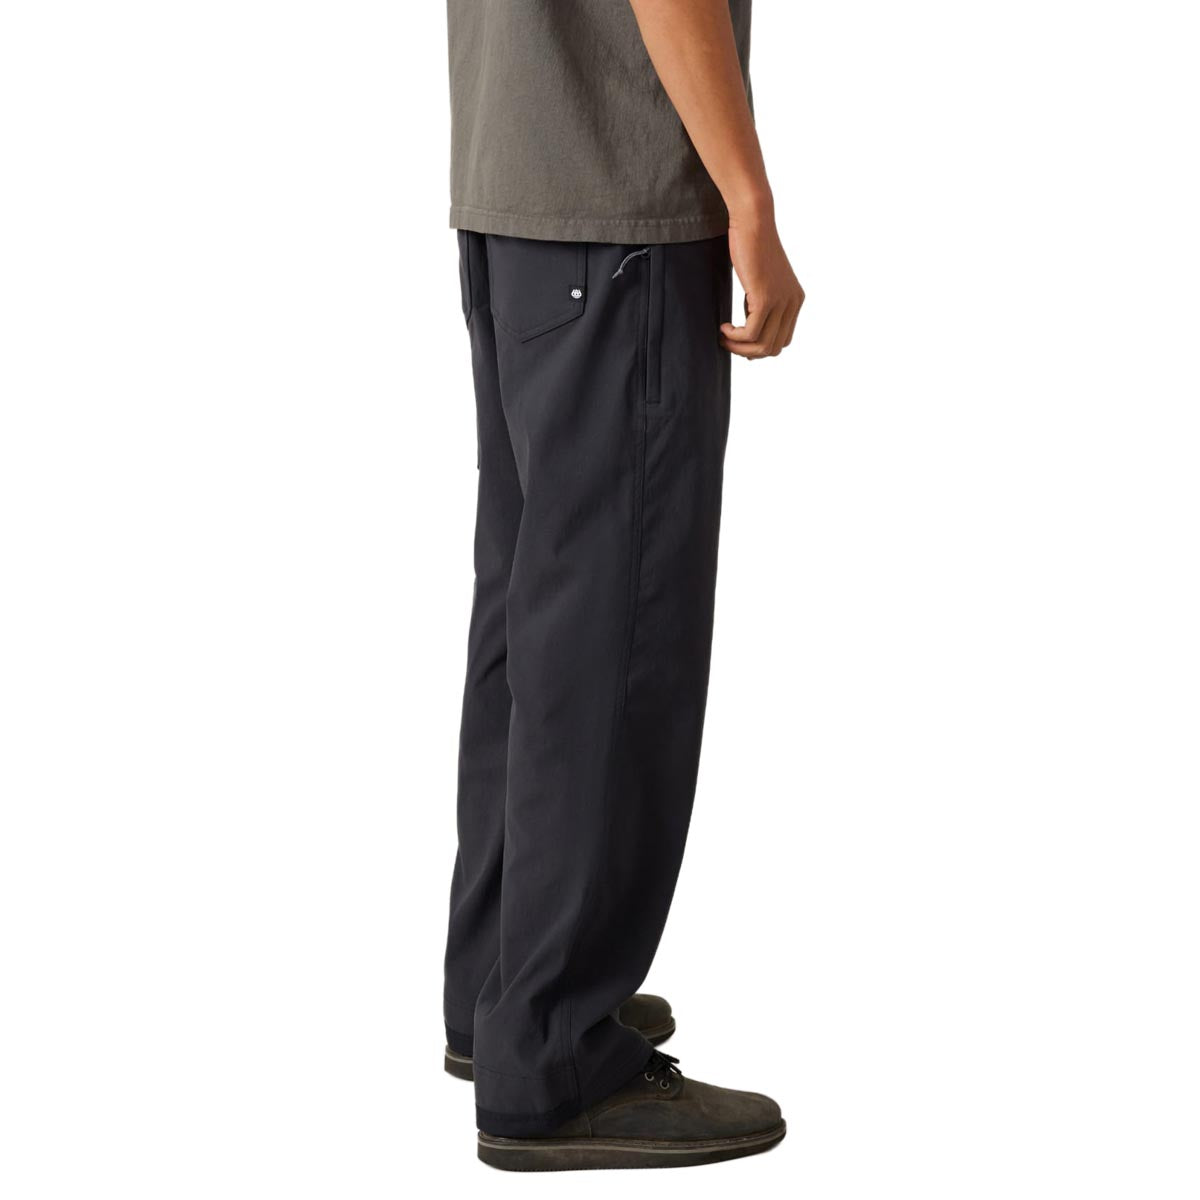 686 Everywhere Unwork Relaxed Fit Pants - Off Black image 2